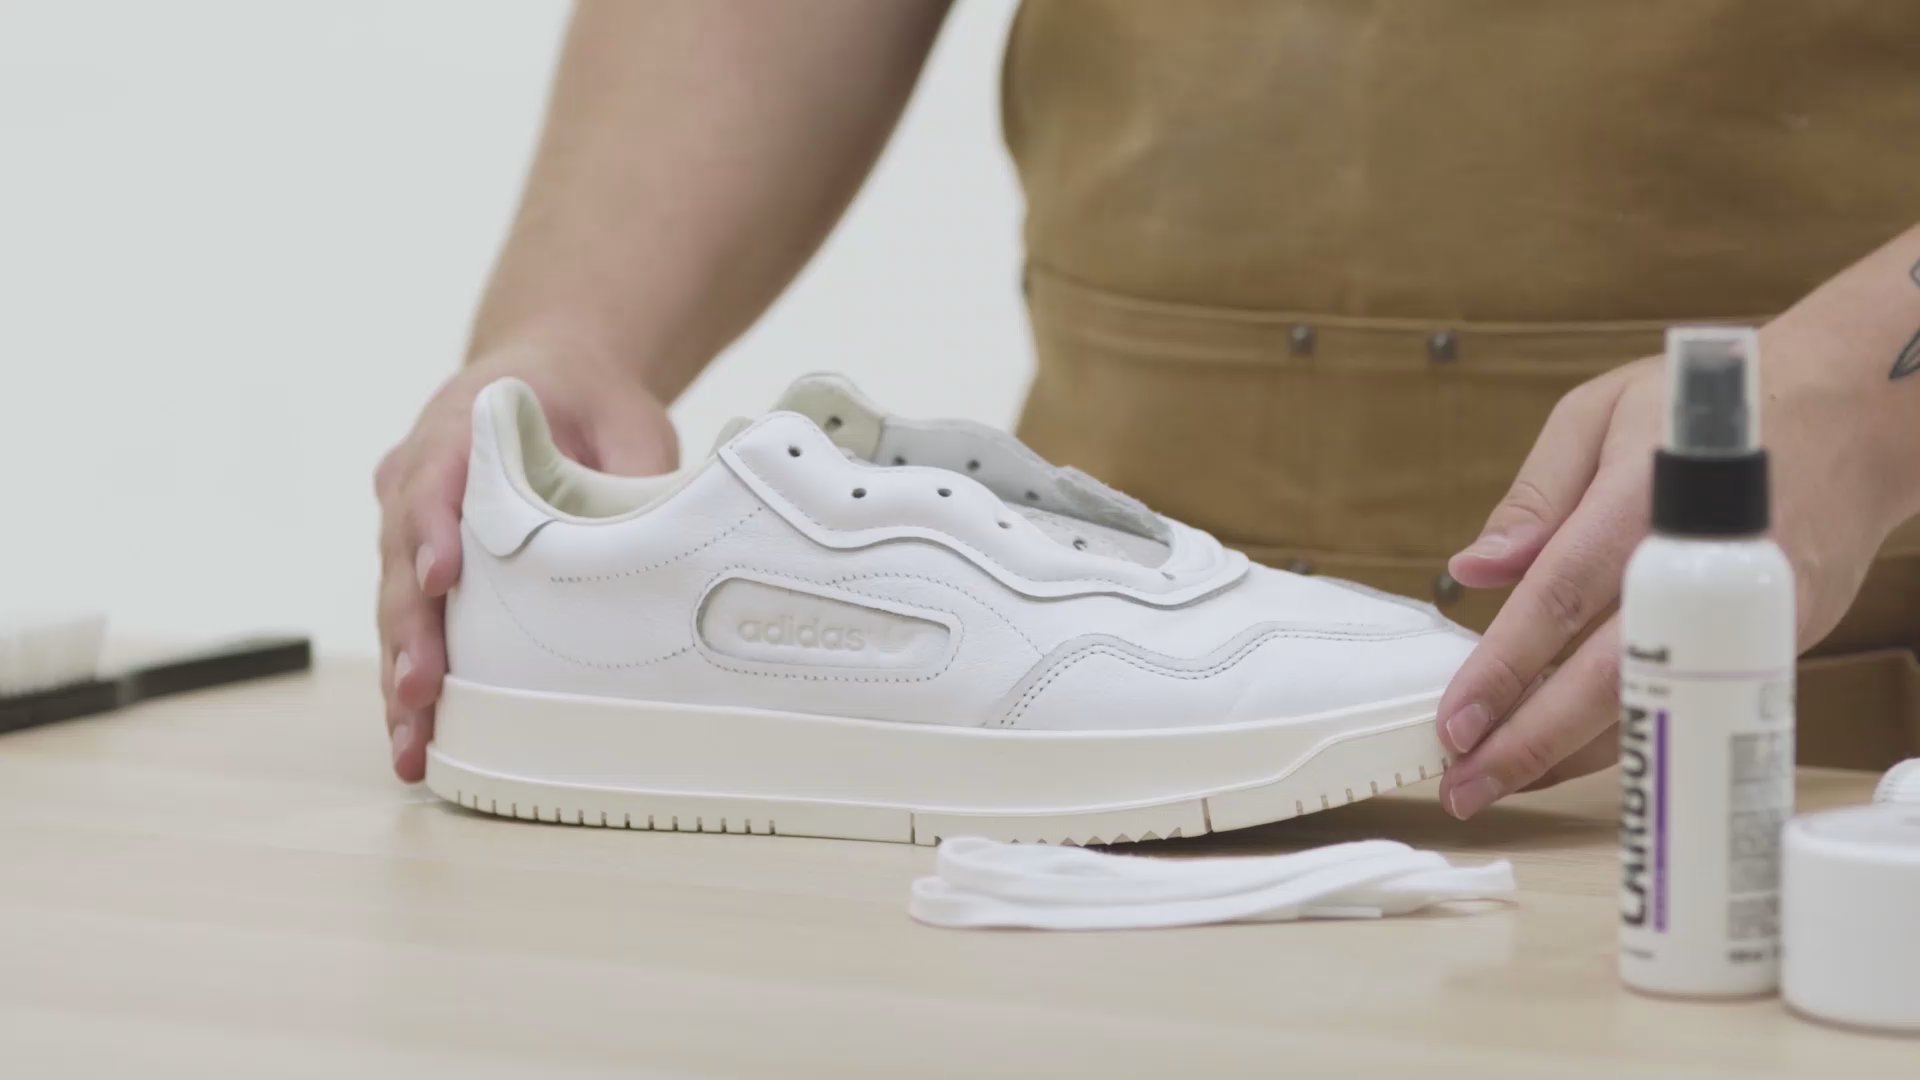 How to Clean White Sneakers, Suede Sneakers, Laces, and More